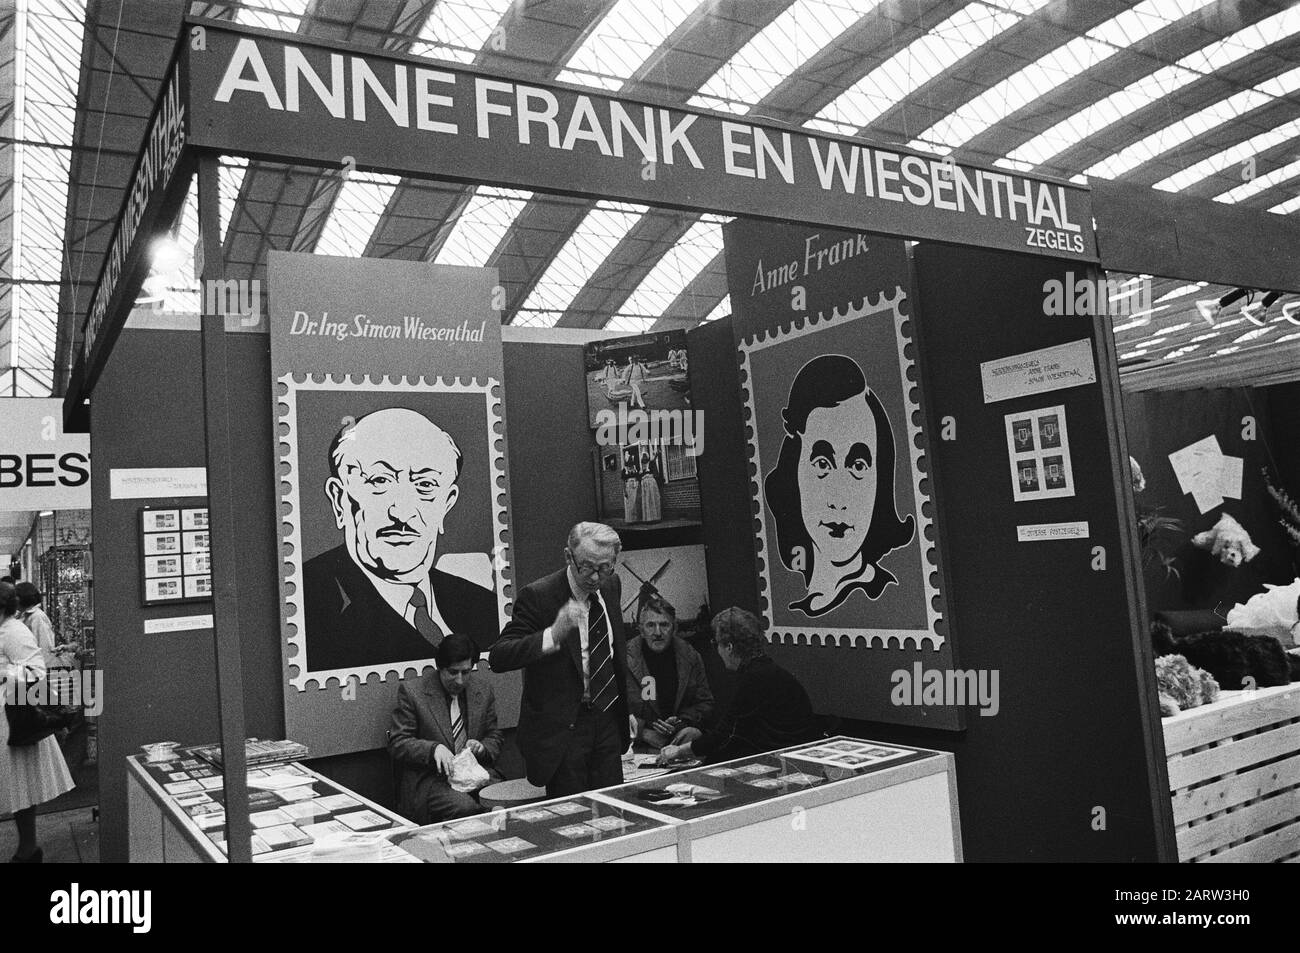 Household fair in RAI Amsterdam  Stands with commemorative stamps of Anne Frank and Simon Wiesenthal Date: 20 april 1979 Location: Amsterdam, Noord-Holland Keywords: fairs, commemorations, stamps Stock Photo